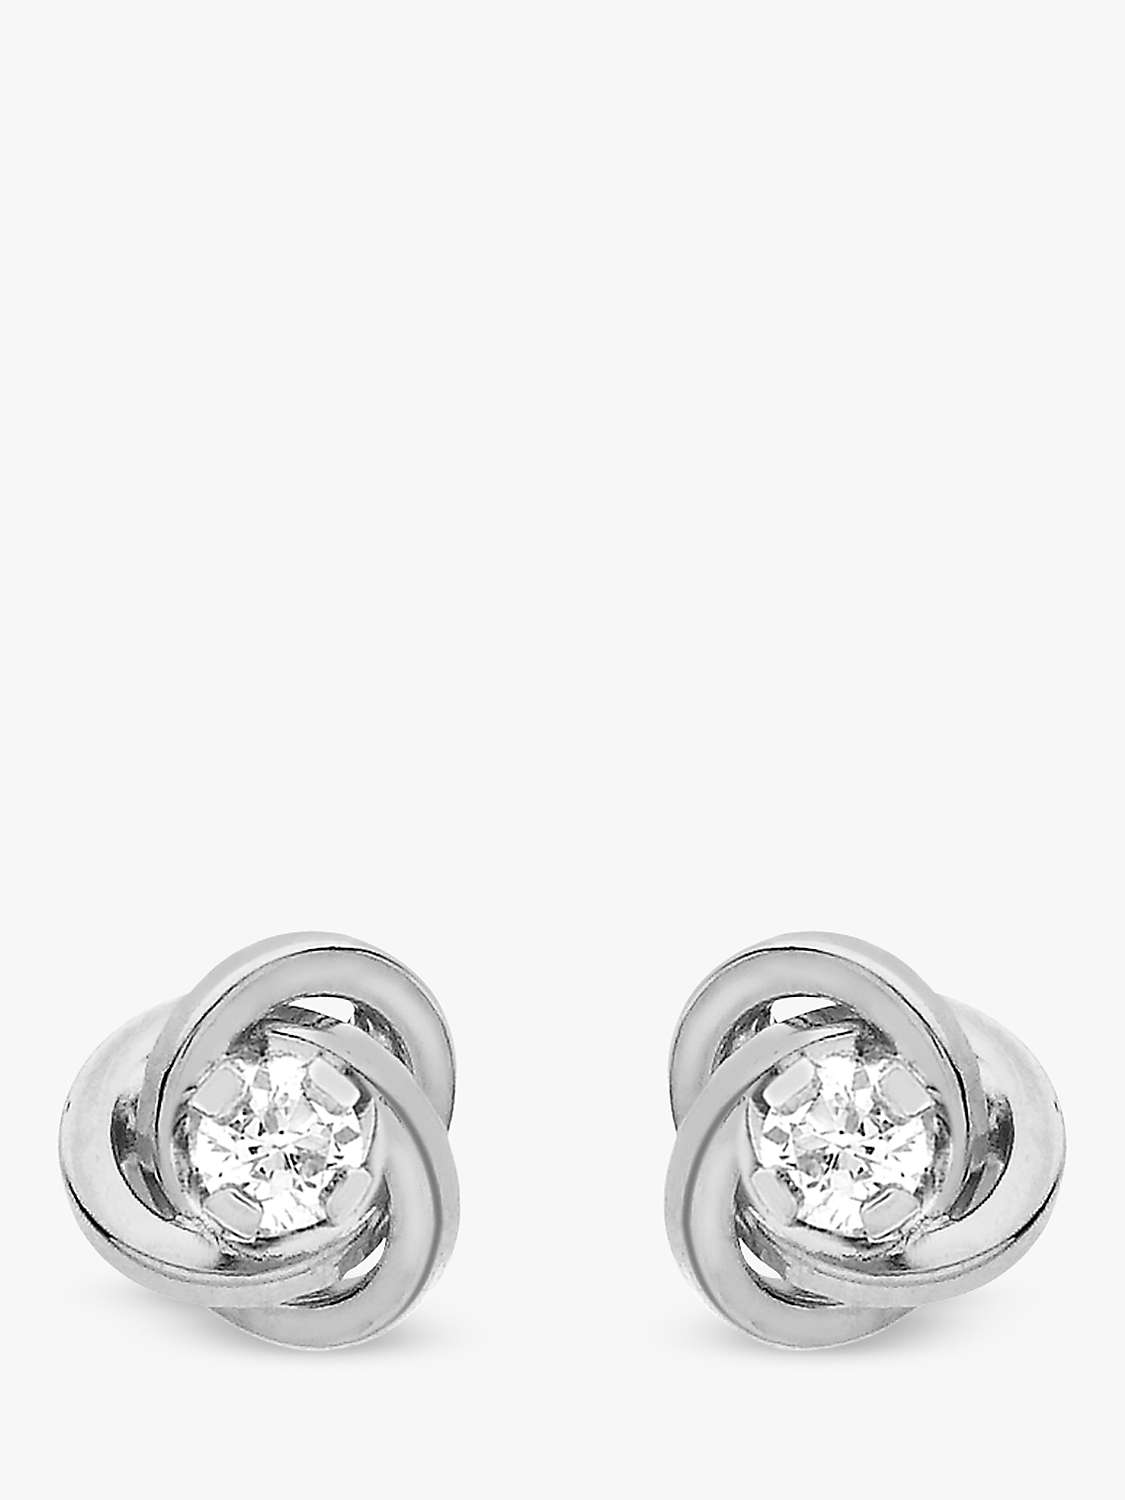 Buy IBB 9ct White Gold Cubic Zirconia Knot Stud Earrings, White Gold Online at johnlewis.com